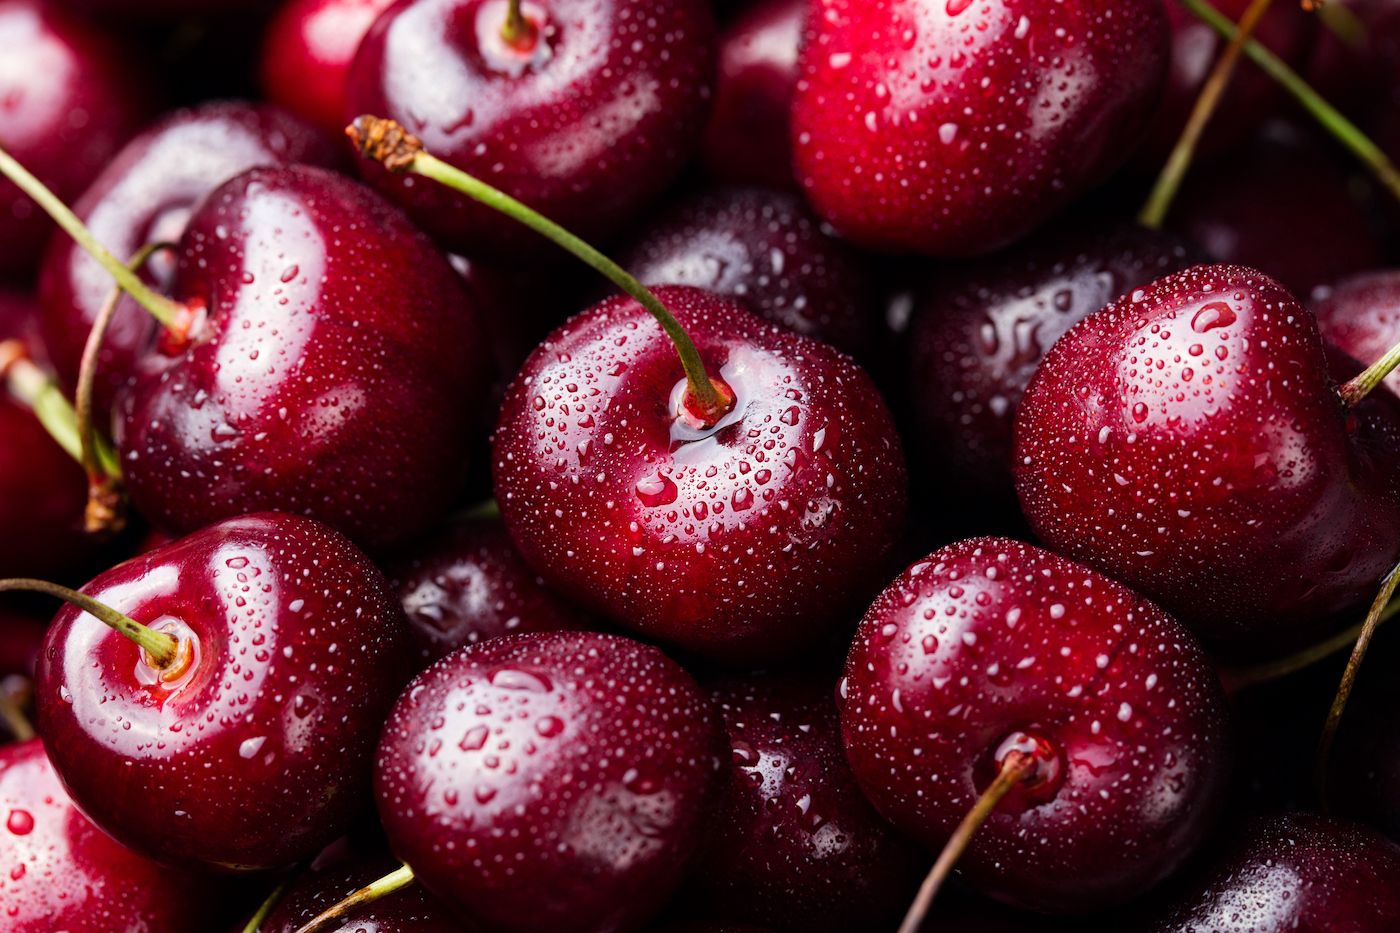 In Canada, about 95 per cent of cherries, come from British Columbia. GETTY